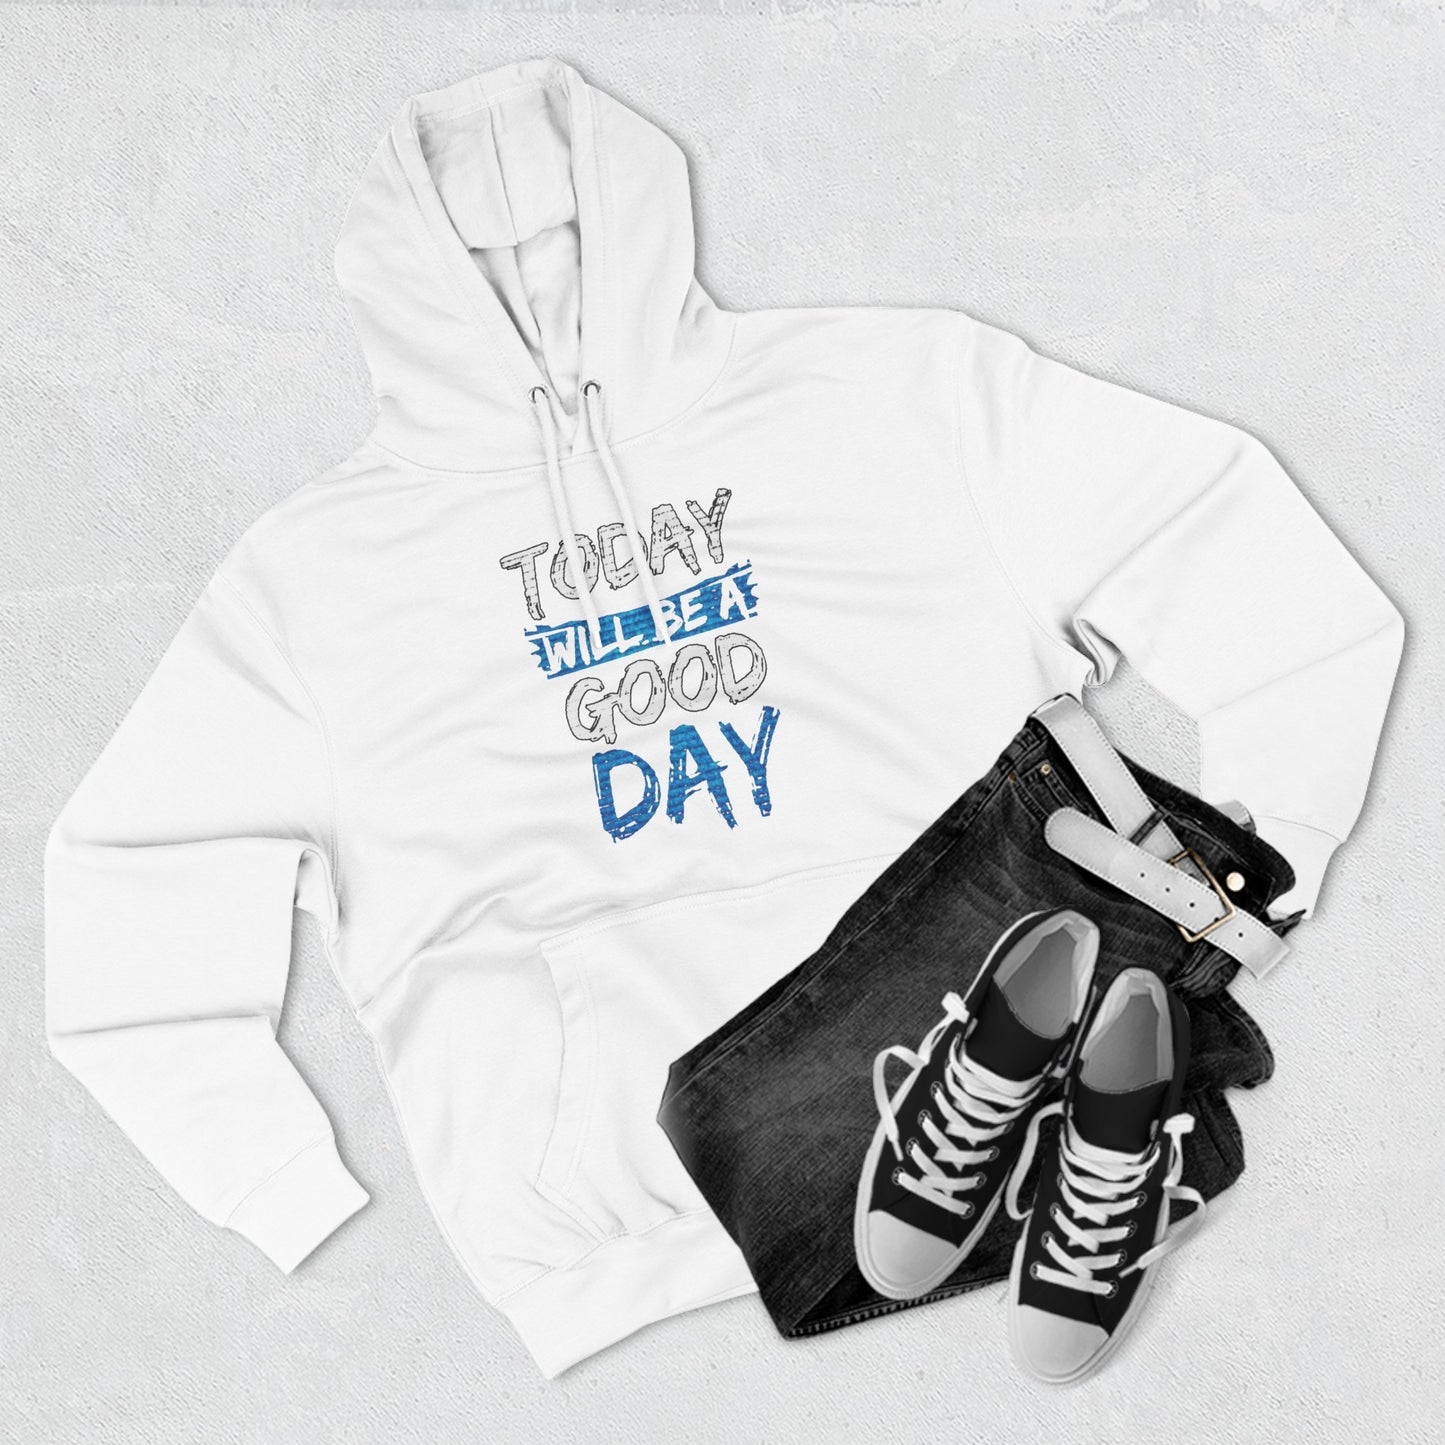 Today Will Be A Good Day High Quality Unisex Heavy Blend™ Hoodie